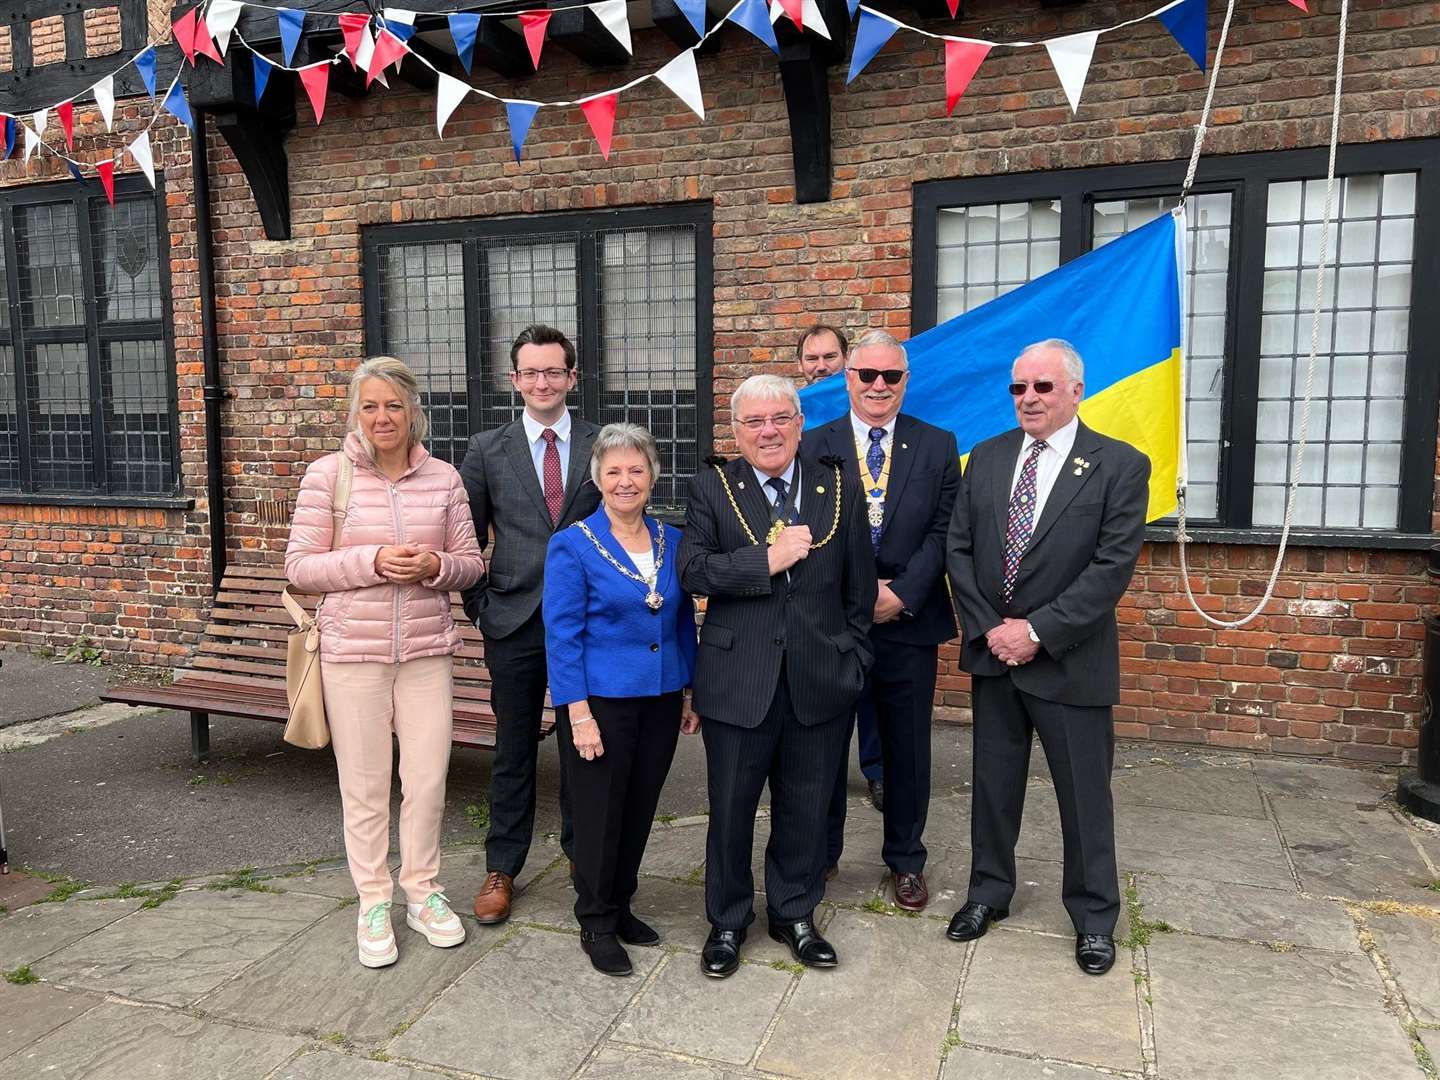 Councillors and Rotary members gathered for a flag raising ceremony on Sandwich Guildhall Forecourt